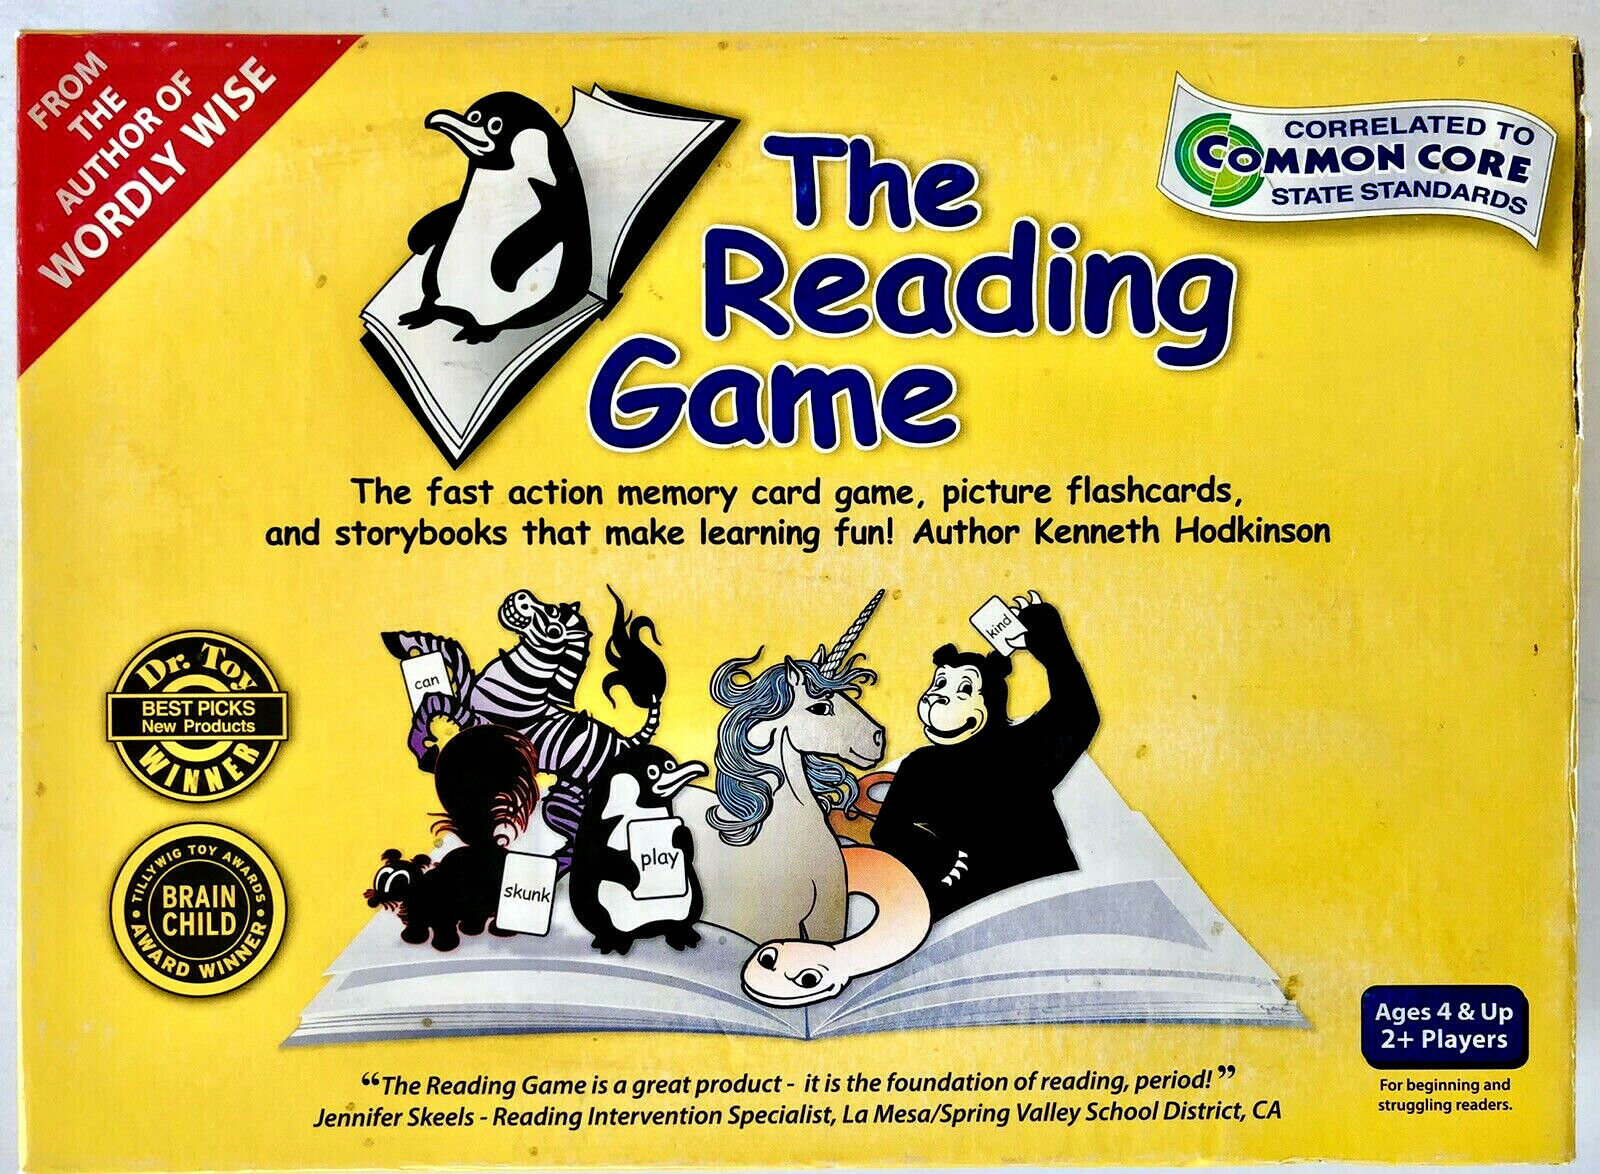 The Reading Game - Learn To Read Program - Fast Action Memory Card Game - Age 4+